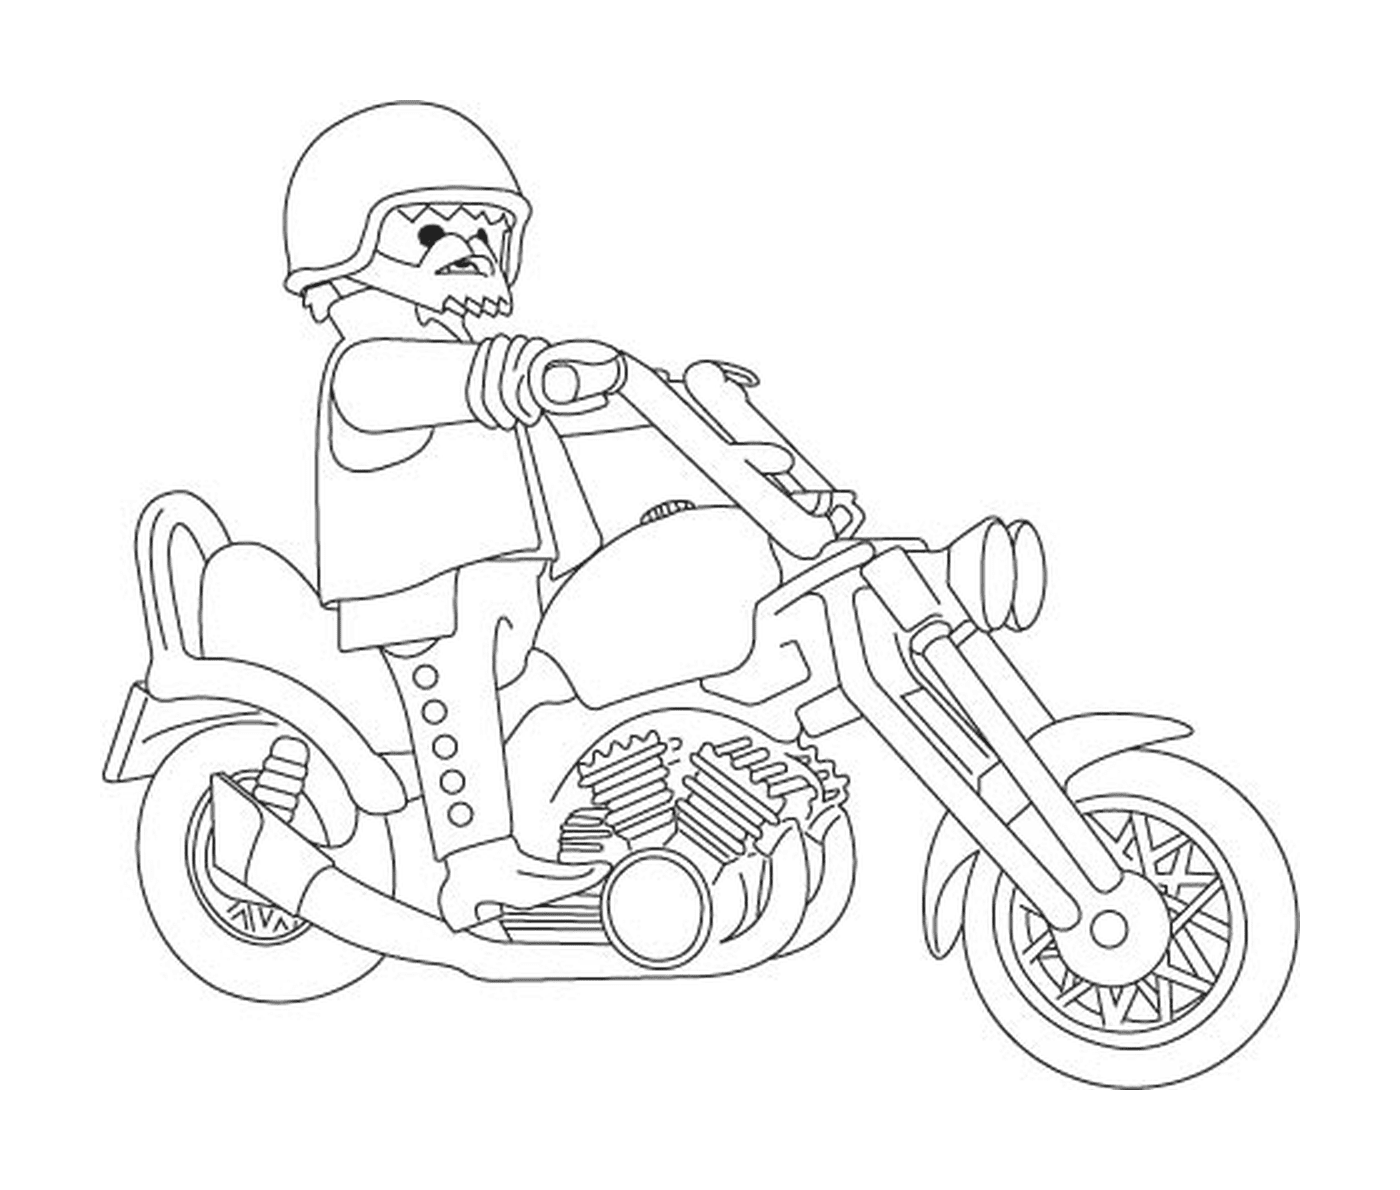  person on cool motorcycle 